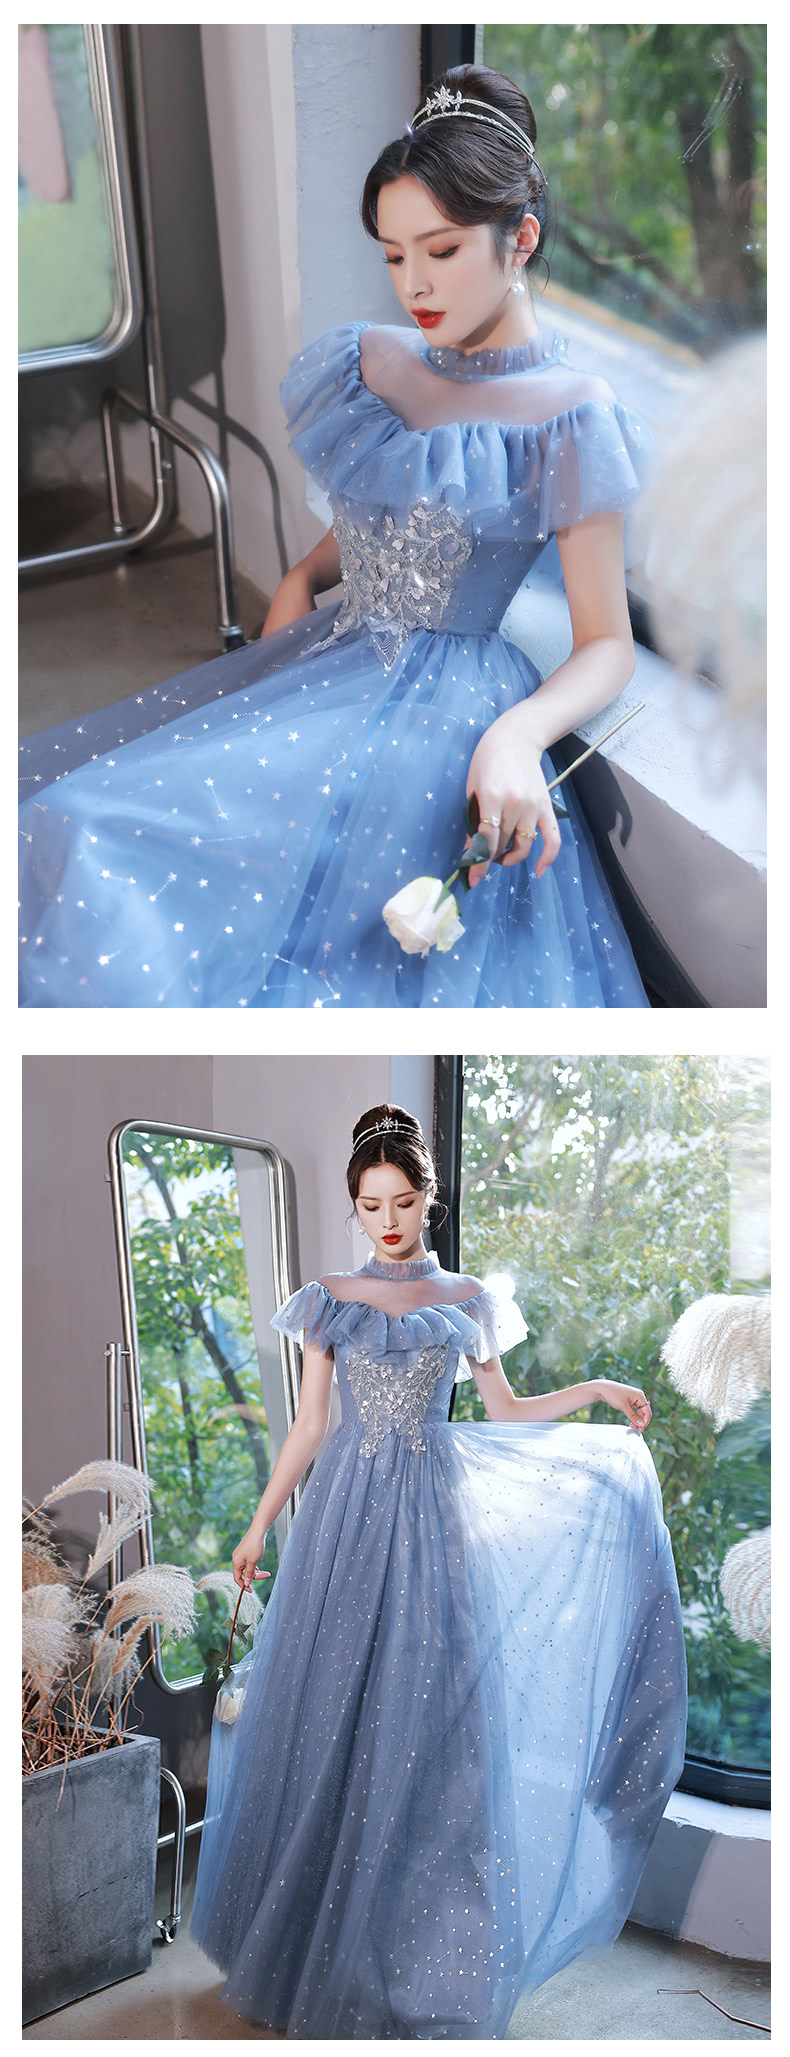 Fashion-Off-the-Shoulder-Long-Blue-Cocktail-Party-Prom-Dress12.jpg